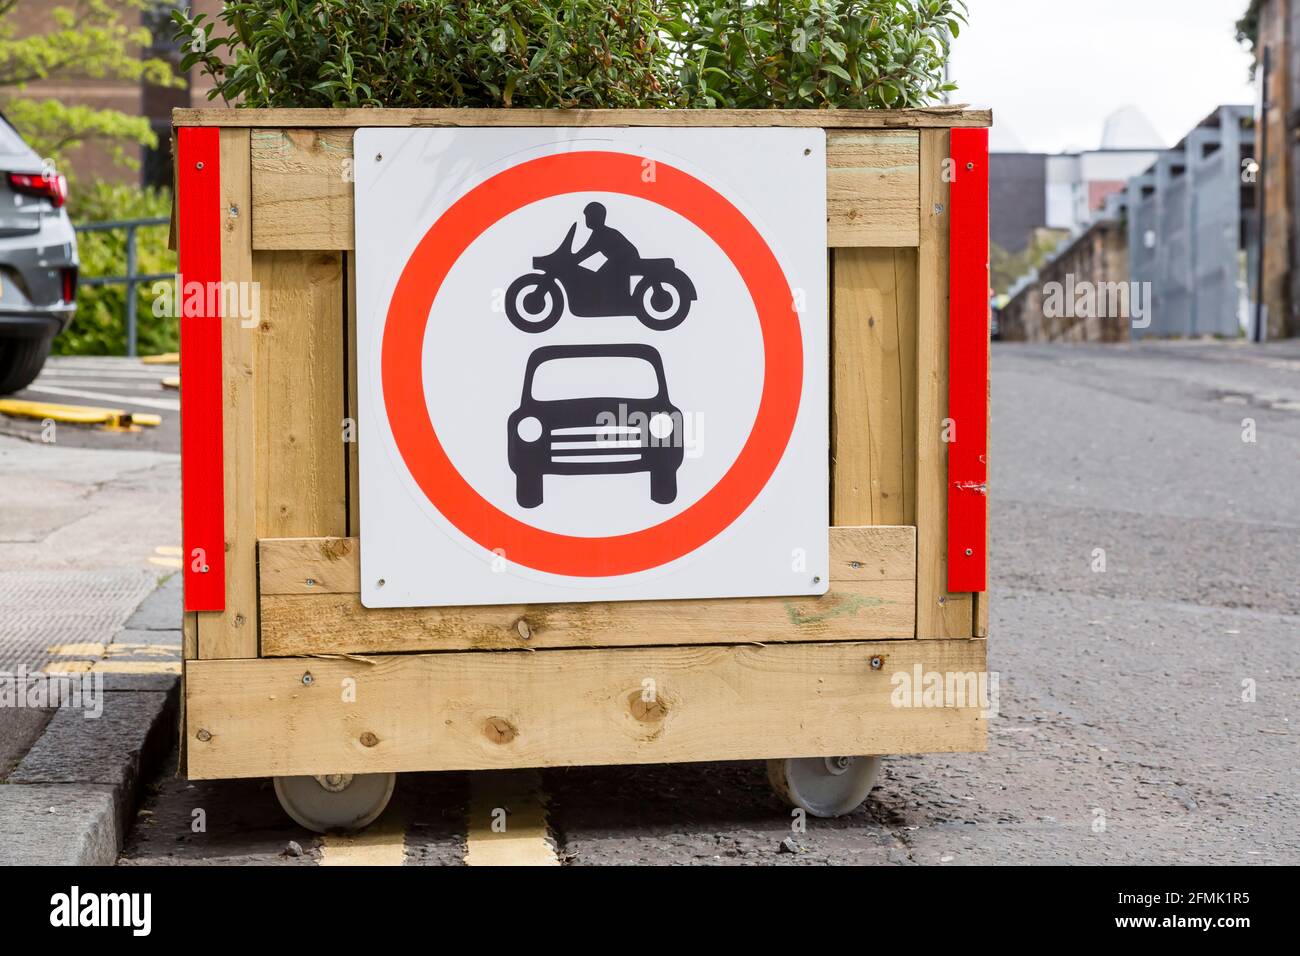 Temporary No Motor Vehicles Allowed sign on a planter box during construction at the University of Strathclyde, Rottenrow, Glasgow, Scotland, UK Stock Photo